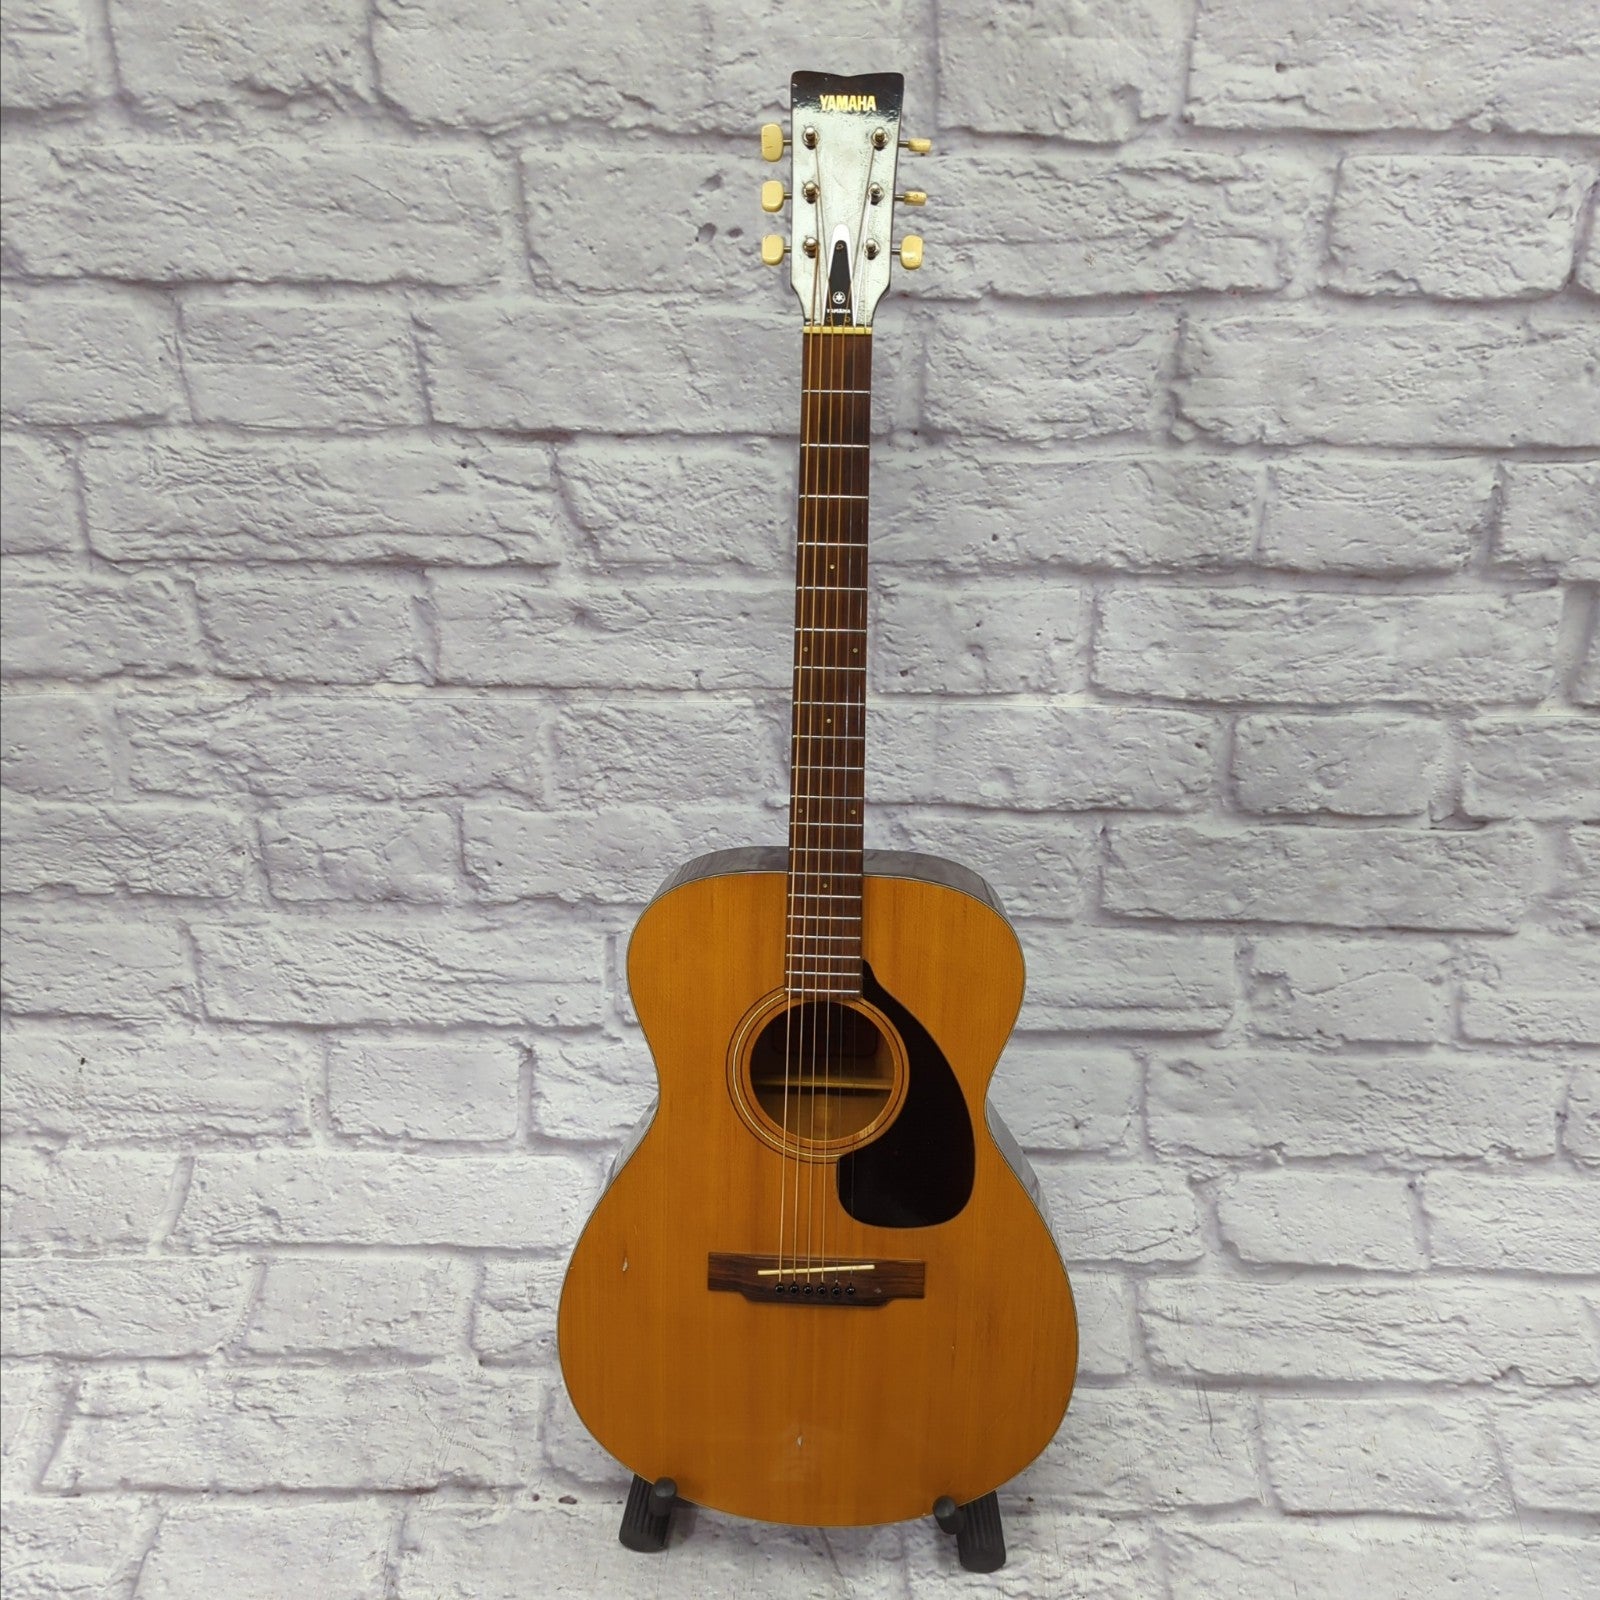 FG-110 Red Label 1970s Concert Acoustic Guitar Taiwan - Evolution